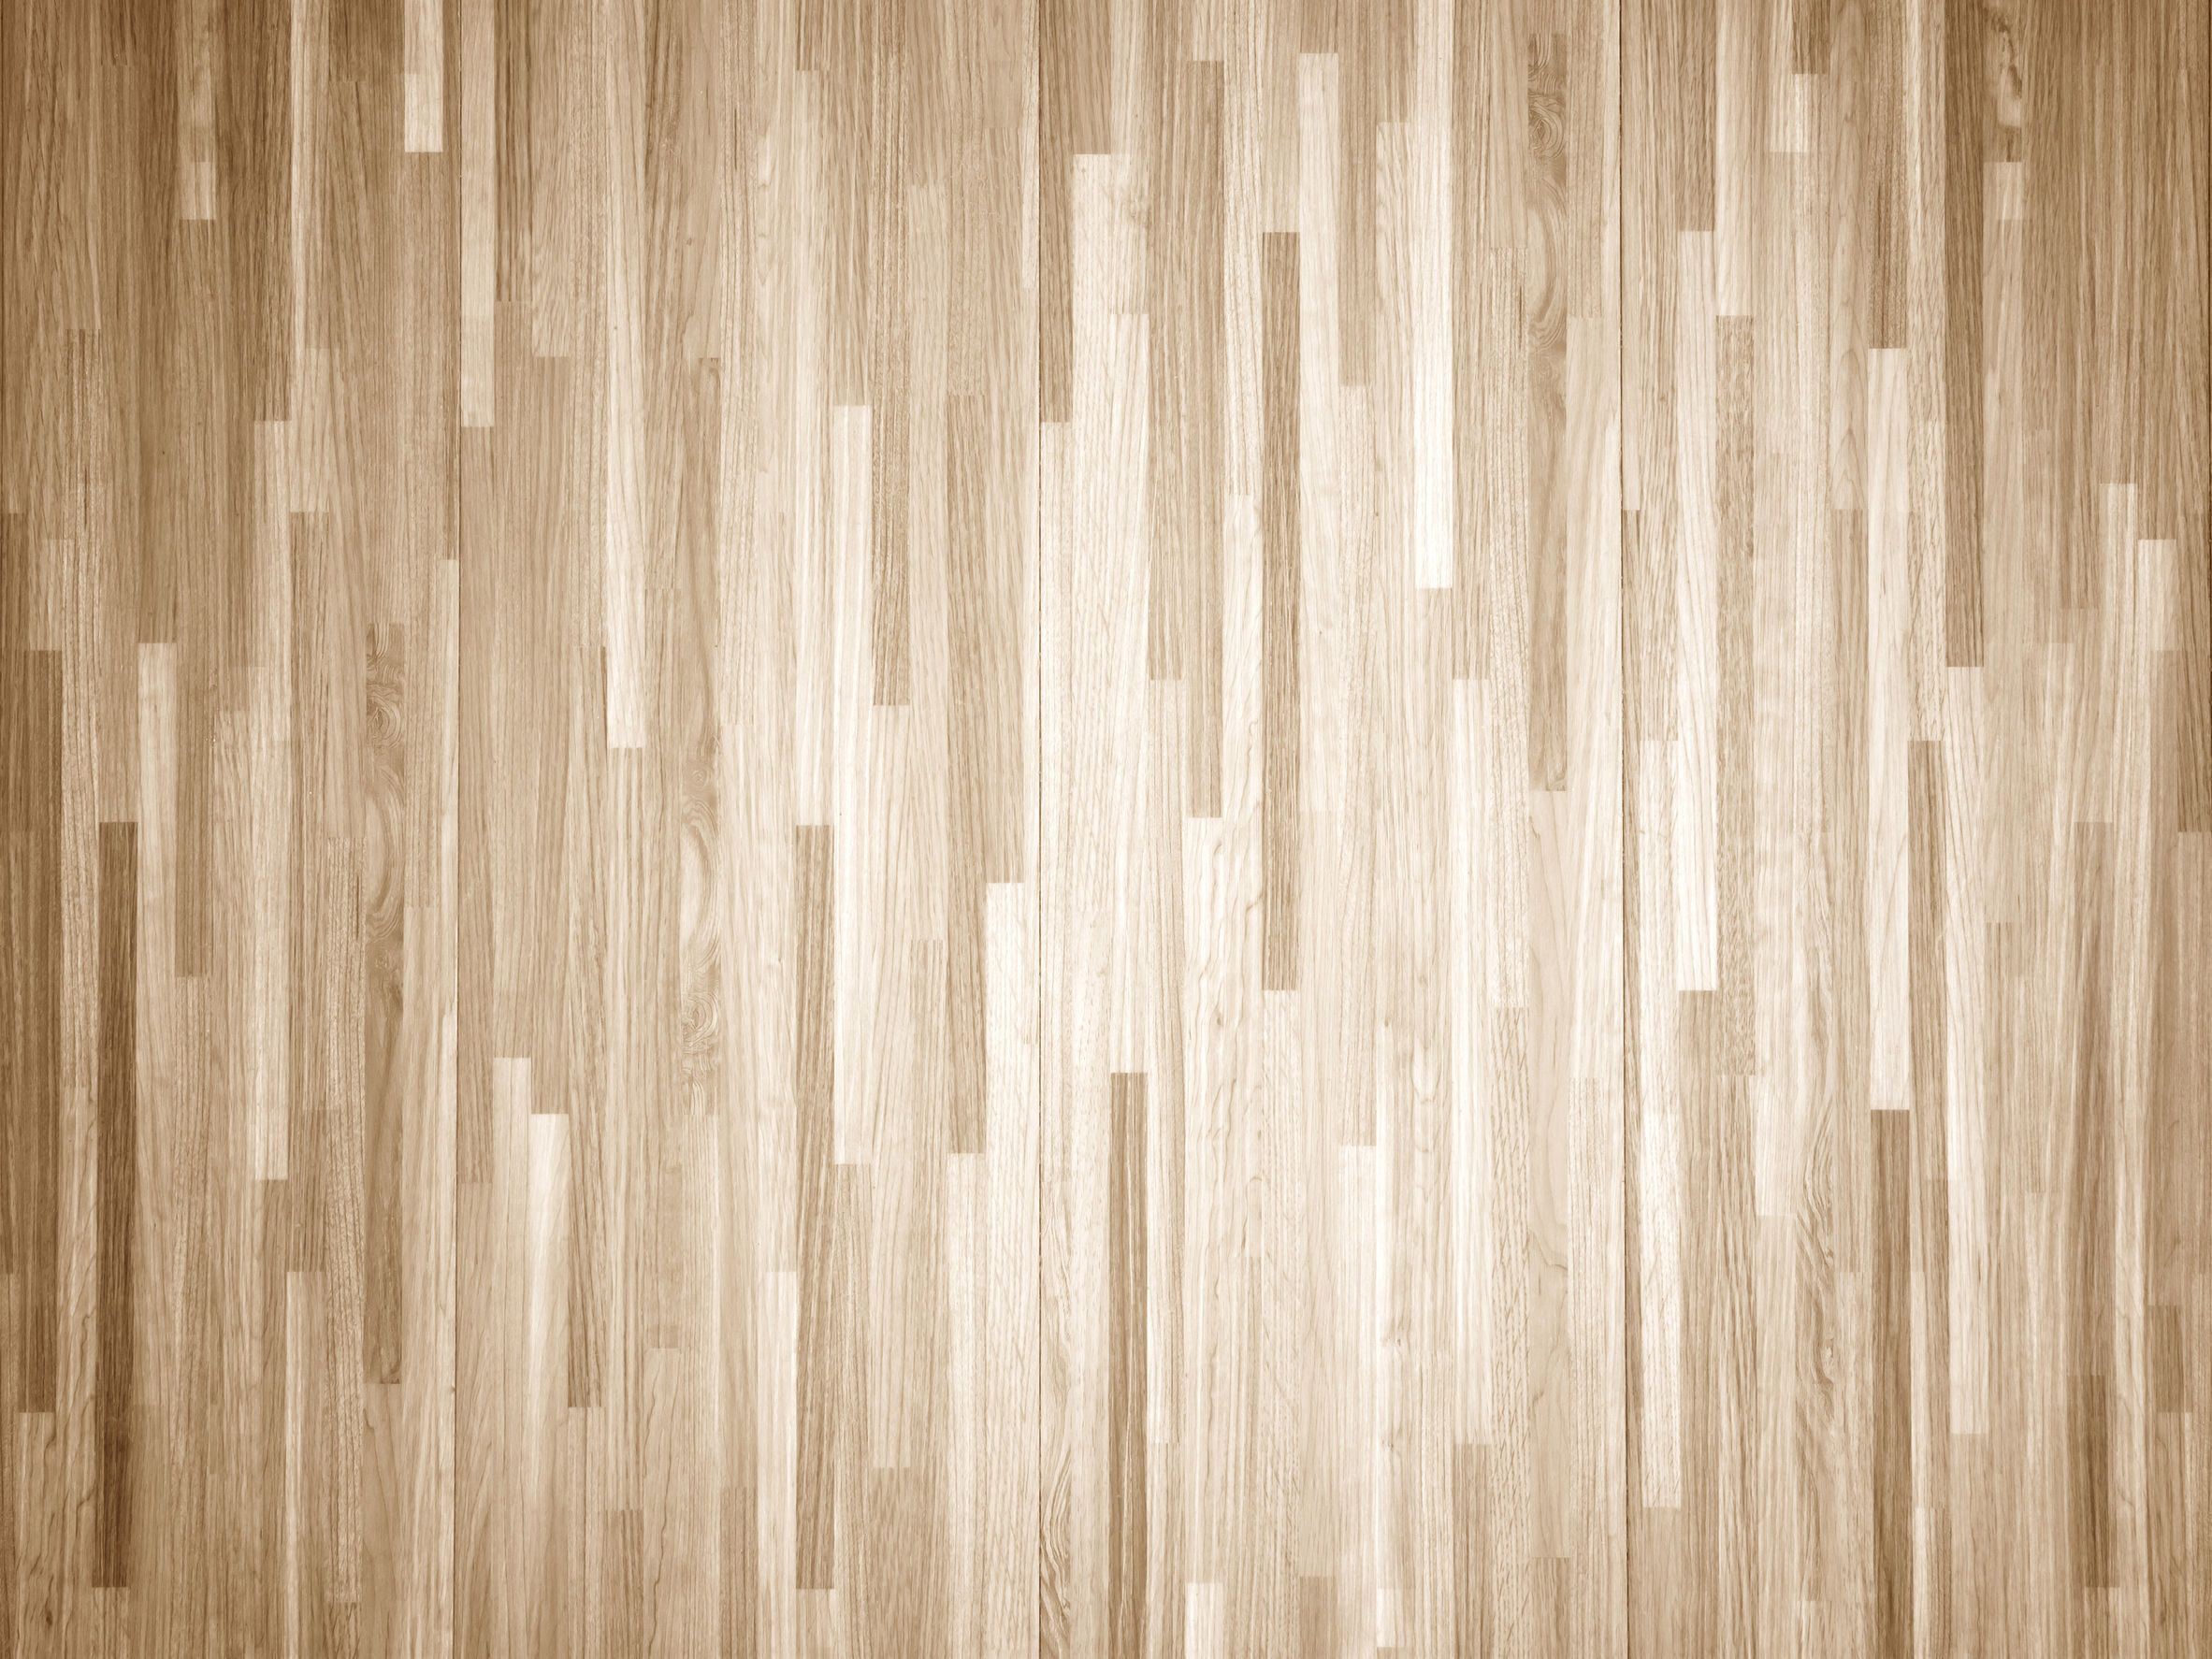 how difficult is it to refinish hardwood floors of how to chemically strip wood floors woodfloordoctor com regarding you